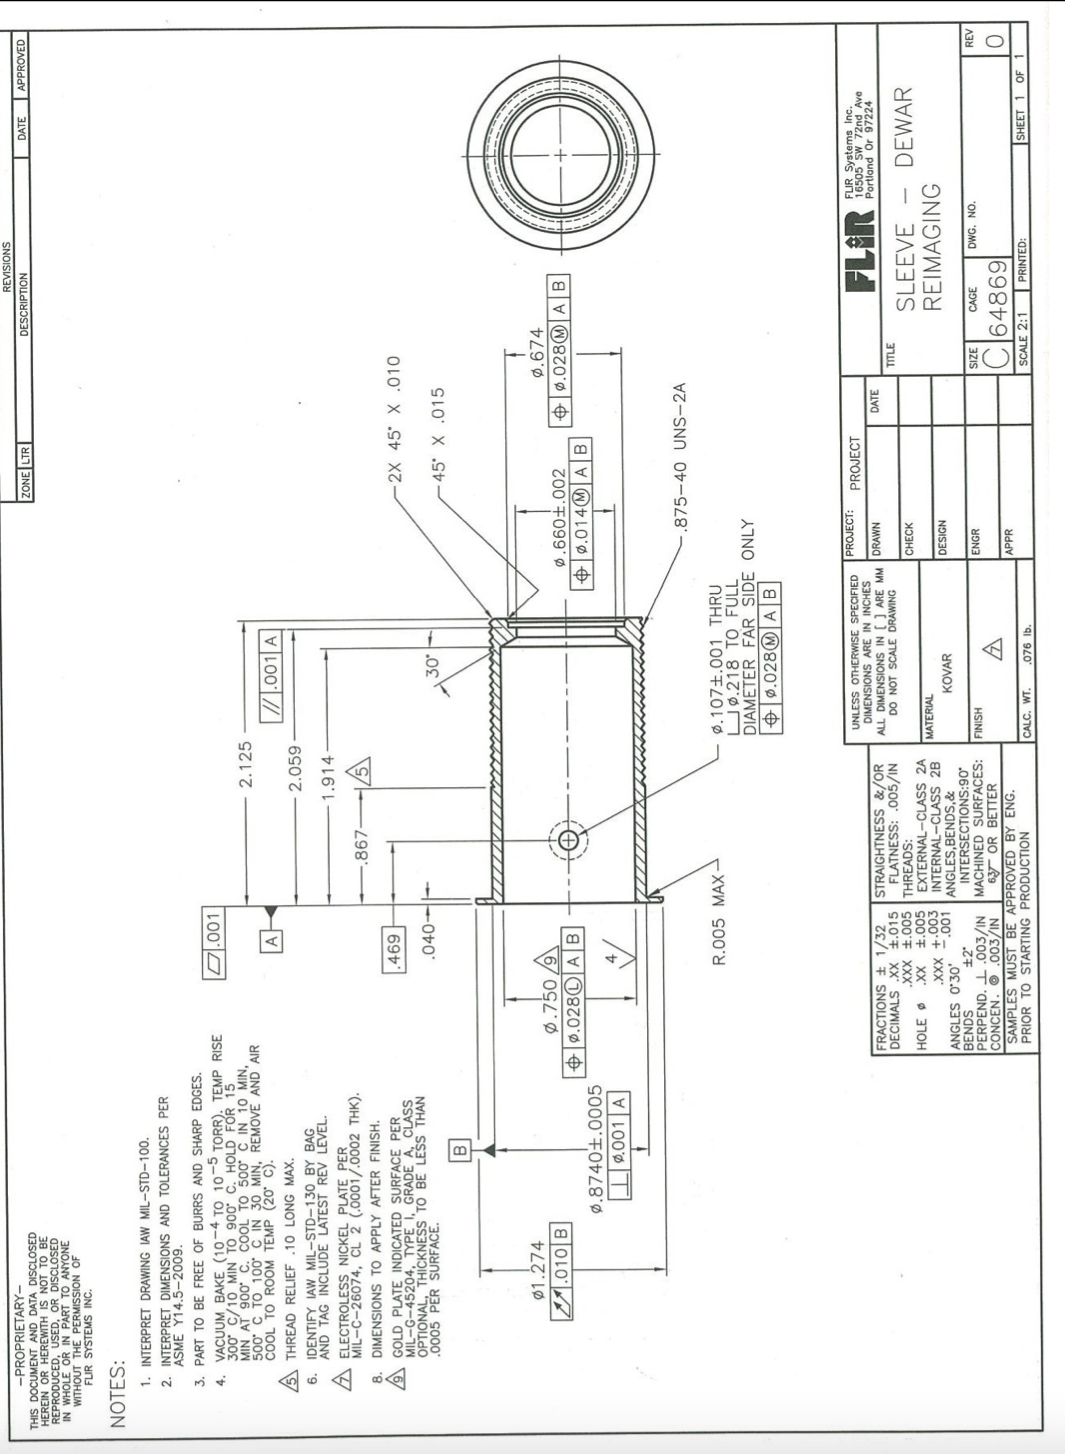 REVISIONS
-PROPRIETARY-
THIS DOCUMENT AND DATA DISCLOSED
HEREIN OR HEREWITH IS NOT TO BE
REPRODUCED, USED, OR DISCLOSED
IN WHOLE OR IN PART TO ANYONE
WITHOUT THE PERMISSION OF
FIR SYSTEMS INC.
ZONE LTR
DESCRIPTION
DATE
APPROVED
NOTES:
1. INTERPRET DRAWING IAW MIL-STD-100.
2. INTERPRET DIMENSIONS AND TOLERANCES PER
ASME Y14.5-2009.
3. PART TO BE FREE OF BURRS AND SHARP EDGES.
.001
4. VACUUM BAKE (10-4 TO 10-5 TORR). TEMP RISE
300 C/10 MIN TO 900 C. HOLD FOR 15
MIN AT 900 C. COOL TO 500 C IN 1O MIN,
500 C TO 100 C IN 30 MIN, REMOVE AND AIR
COOL TO ROOM TEMP (20 C).
2.125
A
/.001 A
A THREAD RELIEF .10 LONG MAX.
2.059
IDENTIFY IAW MIL-STD-130 BY BAG
AND TAG INCLUDE LATEST REV LEVEL.
6.
1.914
A ELECTROLESS NICKEL PLATE PER
MIL-C-26074, CL 2 (.0001/.0002 THK).
.867-
8. DIMENSIONS TO APPLY AFTER FINISH.
9GOLD PLATE INDICATED SURFACE PER
MIL-G-45204, TYPE I, GRADE A, CLASS
OPTIONAL, THICKNESS TO BE LESS THAN
.0005 PER SURFACE.
2X 45 X .010
69
45° X .015
Ø1.274
Ø.674
Ø.750 /9\
+ ø.028O AB
스.010|B
$ ø.028@ A B
+ ø.0140 A B
Ø.8740±.0005
0.001 A
875-40 UNS-2A
R.005 MAX
Ø.107±.001 THRU
U ø.218 TO FULL
DIAMETER FAR SIDE ONLY
$ ø.028@ A B
PROJECT:
UNLESS OTHERWISE SPECIFIED
DIMENSIONS ARE IN INCHES
ALL DIMENSIONS IN [J ARE MM DRAWN
DO NOT SCALE DRAWING
FLIR
FLIR Systems Inc.
16505 SW 72nd Ave
Portland Or 97224
PROJECT
FRACTIONS ± 1/32
DECIMALS .XX 1.015
STRAIGHTNESS &/OR
FLATNESS: .005/IN
DATE
TITLE
.XXX +.005 THREADS:
SLEEVE
REIMAGING
DEWAR
CHECK
S00'F XX
EXTERNAL-CLASS 2A
£00'+ XXX
INTERNAL-CLASS 28
HOLE O
MATERIAL
-.001 ANGLES,BENDS,&
DESIGN
KOVAR
ANGLES O'30'
BENDS
PERPEND. I .003/IN MACHINED SURFACES:
CONCEN. O .003/IN
SAMPLES MUST BE APPROVED BY ENG.
PRIOR TO STARTING PRODUCTION
±2
INTERSECTIONS:90
FINISH
ENGR
CAGE
DWG. NO.
REV
3ZIS
6Y OR BETTER
C]64869
APPR
CALC. WT.
SCALE 2:1
PRINTED:
SHEET 1 OF
.076 lb.
